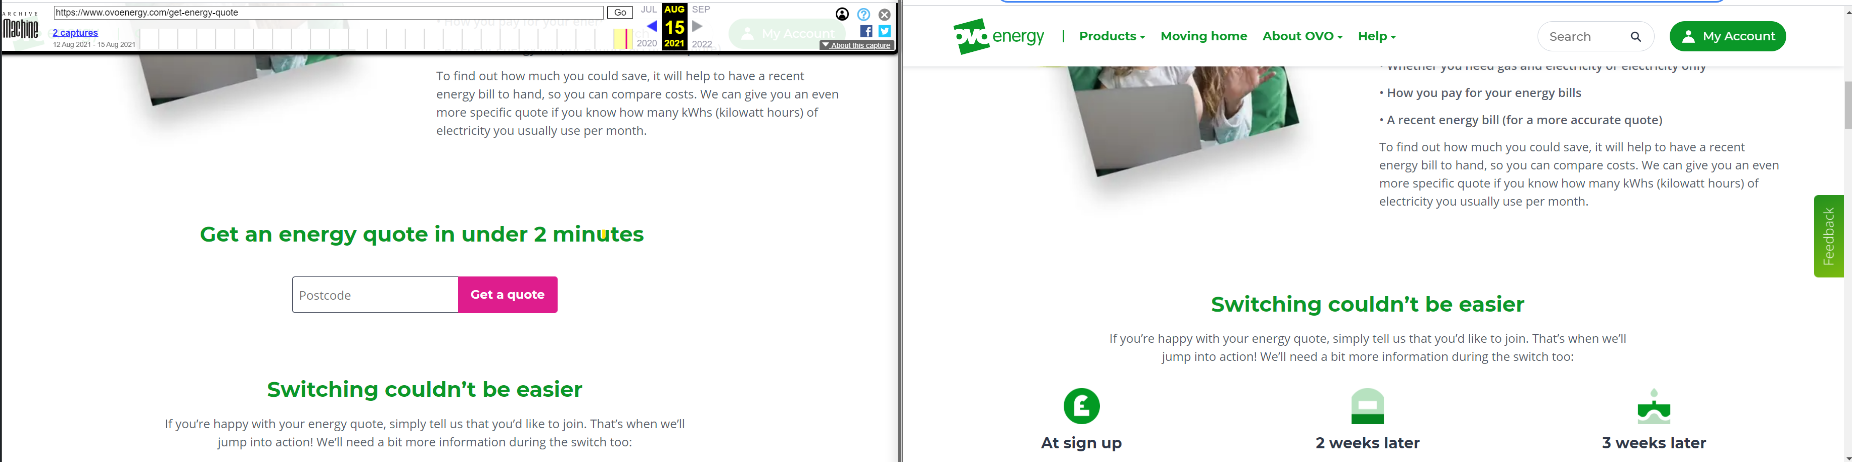 Ovo Energy’s “get a quote” button was on its website in August (left), but has since been removed (right).